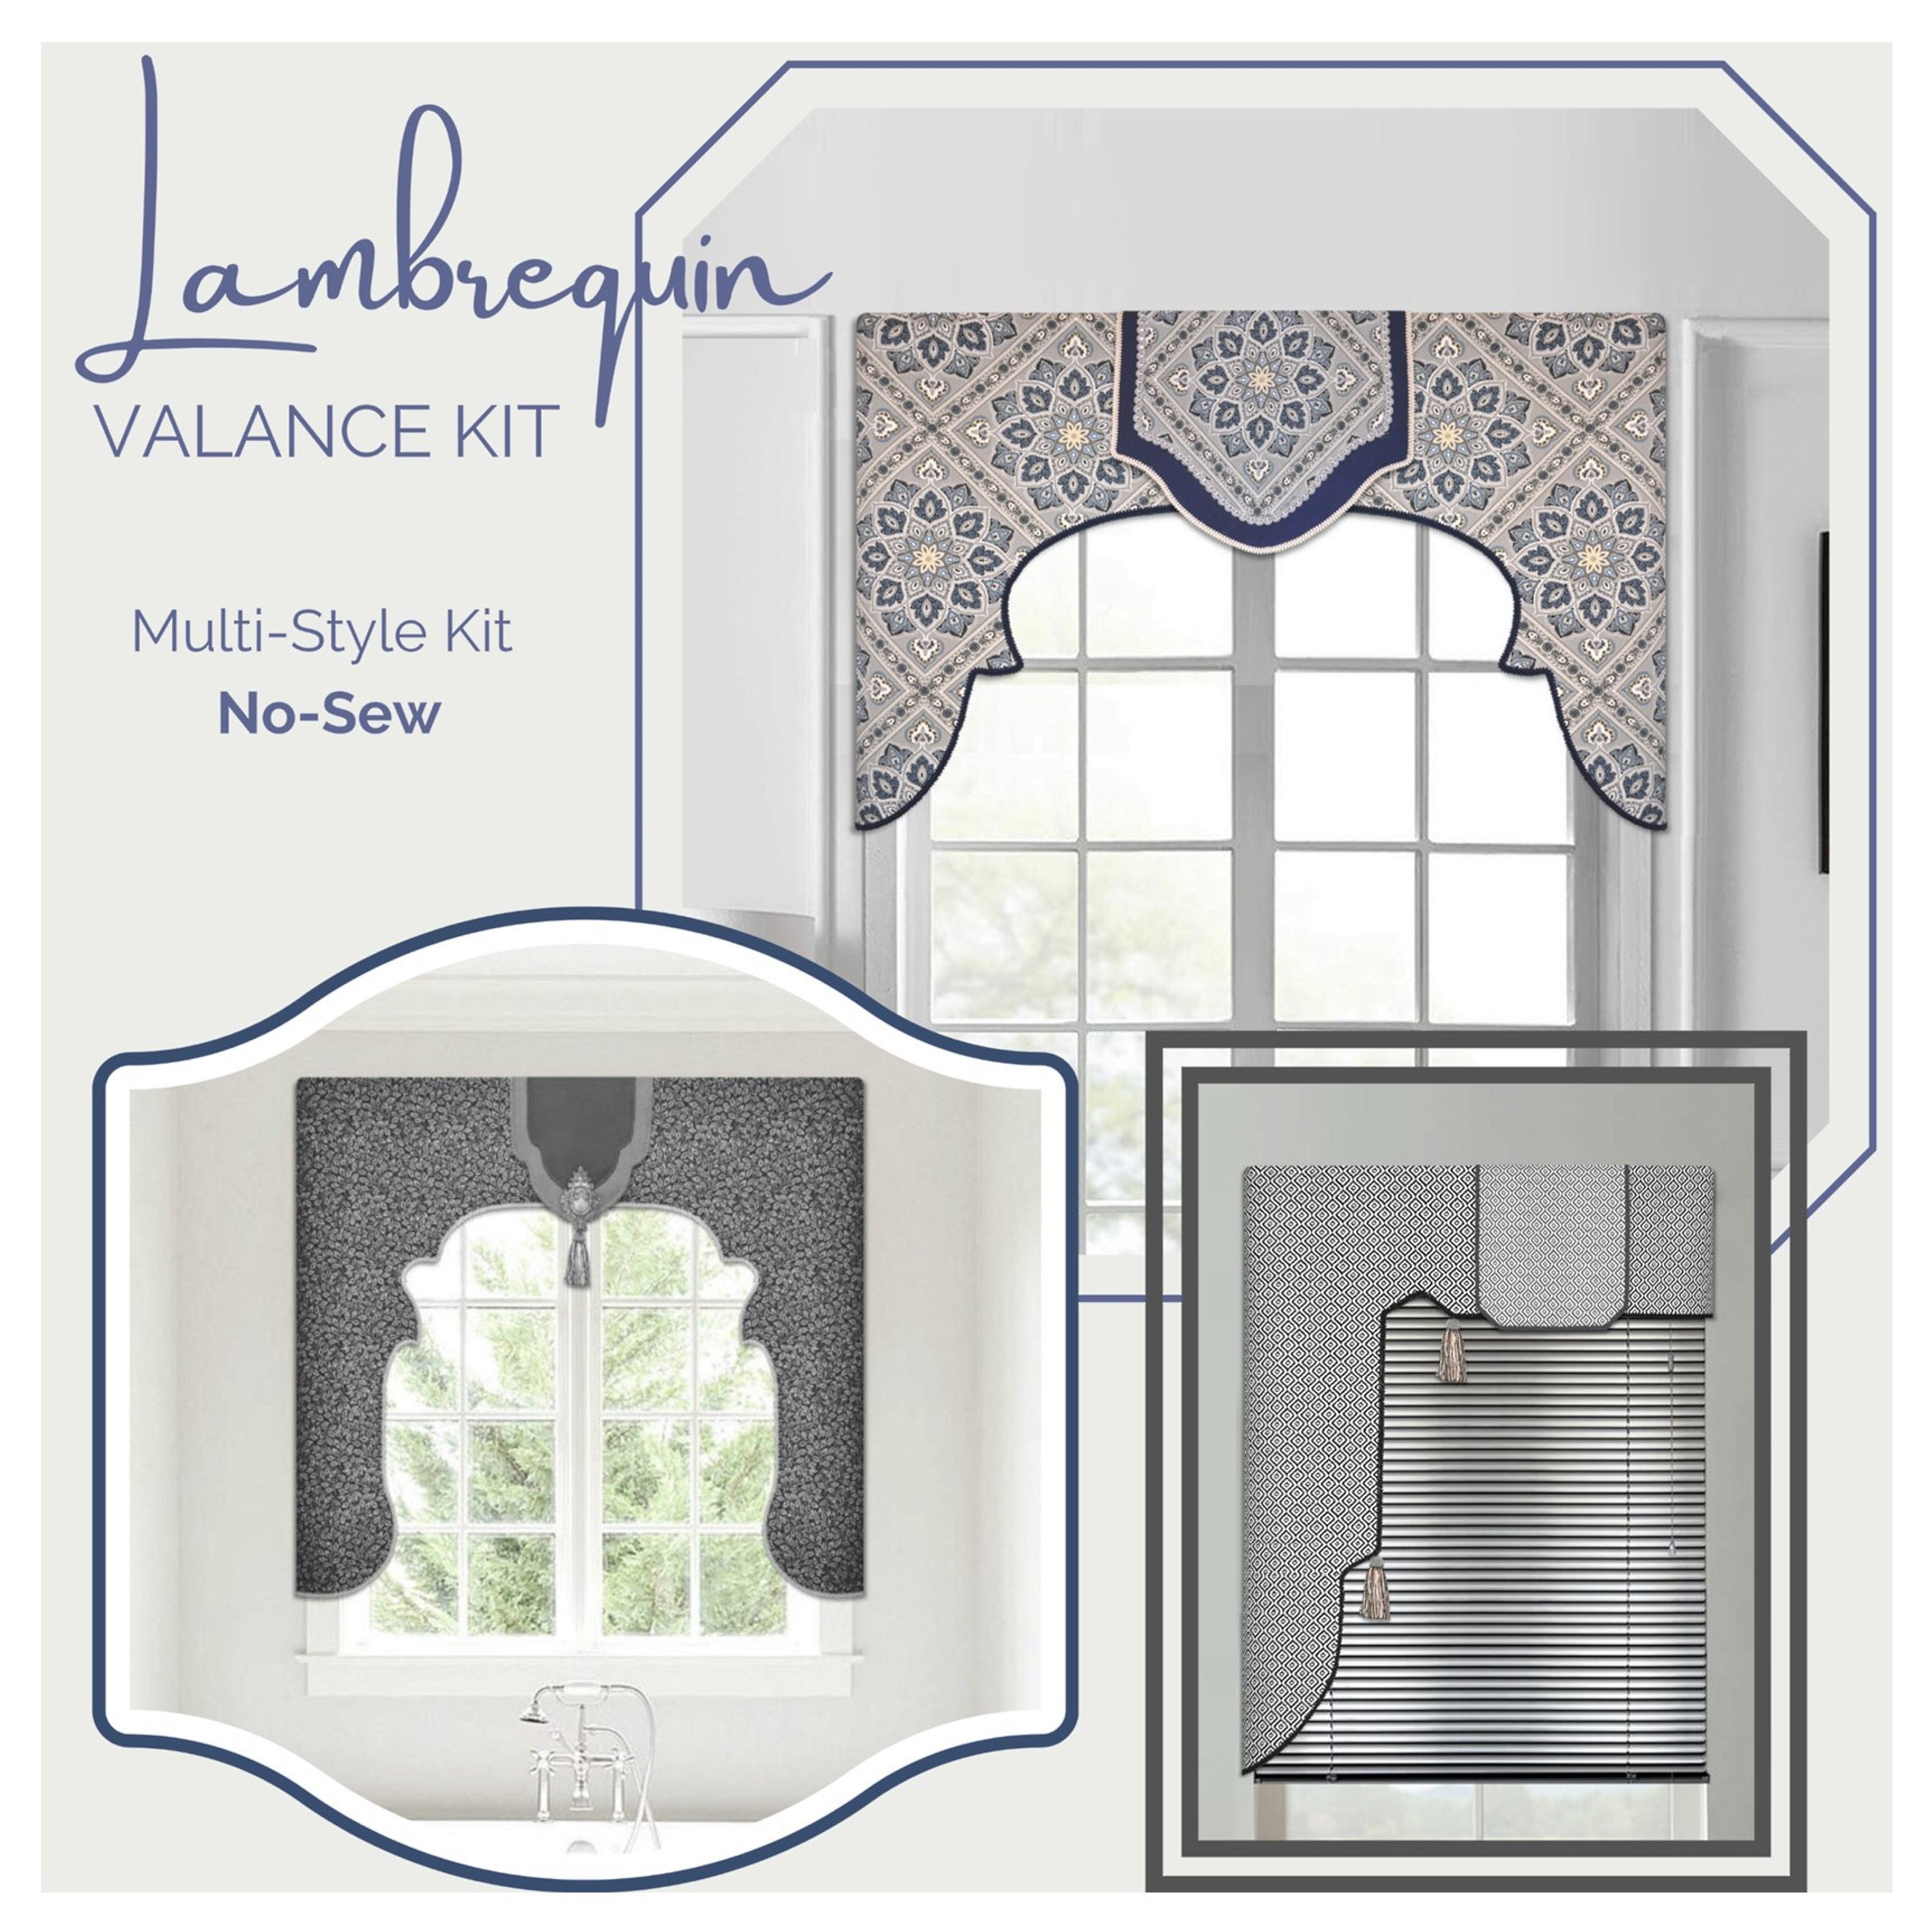 Traceable Designer DIY no-sew lambrequin valance kit. Cornice-style lambrequin kit includes 3 interchangeable styles. No-sew valance design forms are easier and more flexible than sewing!